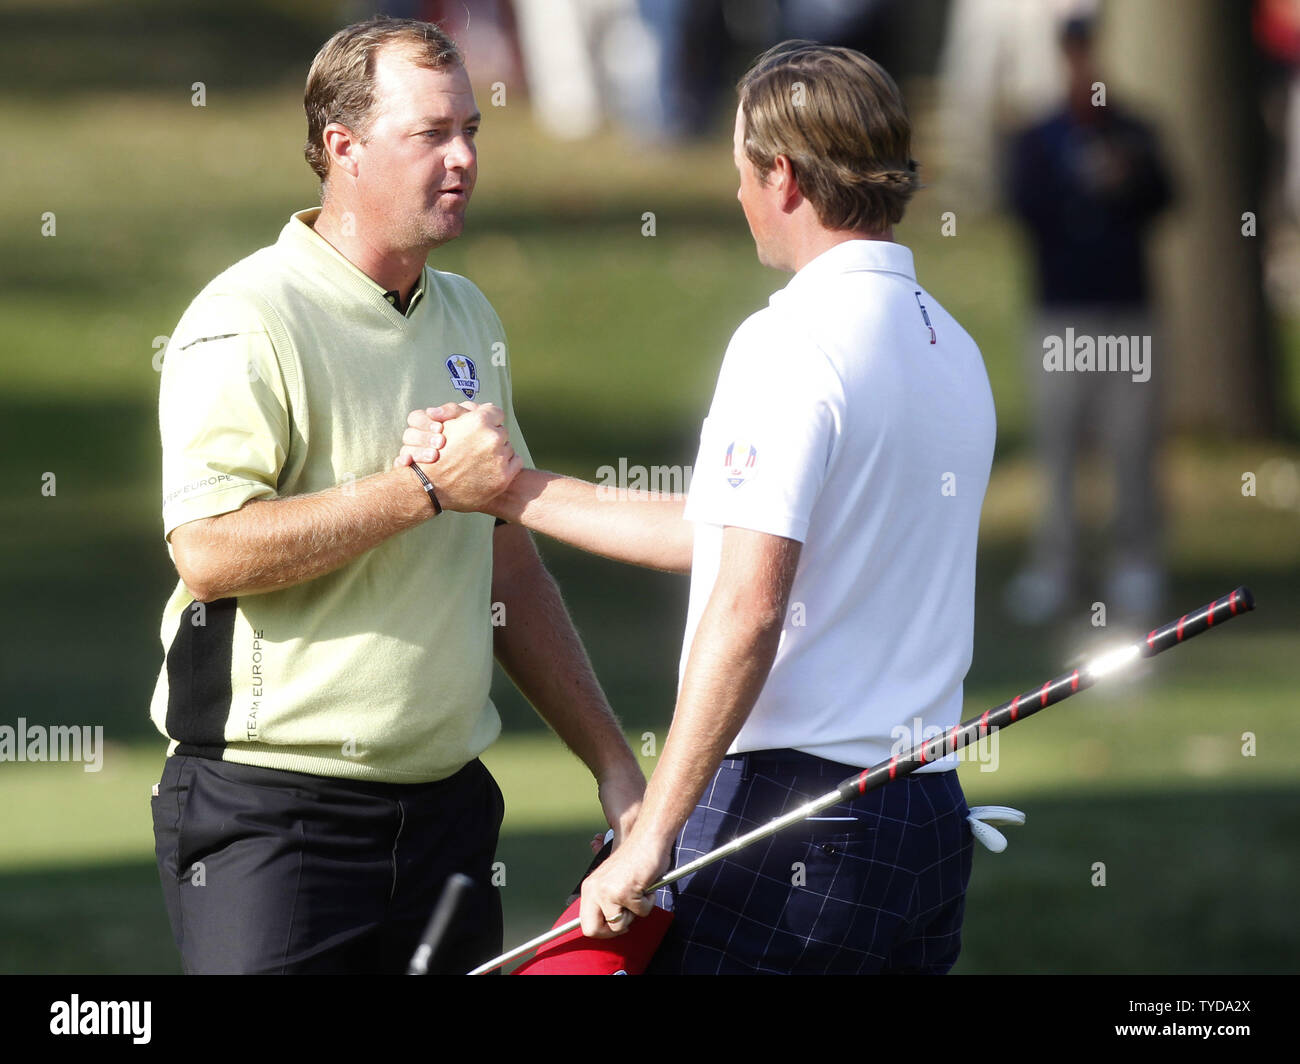 Team Europe's Peter Hanson, of Sweden, left, congratulates USA's Webb Simpson, right, after Simpson and Bubba Watson defeated Hanson and Paul Lawrie during Fourball match play at the 39th Ryder Cup at Medinah Country Club on September 28, 2012 in Medinah, Illinois.   UPI/Mark Cowan Stock Photo